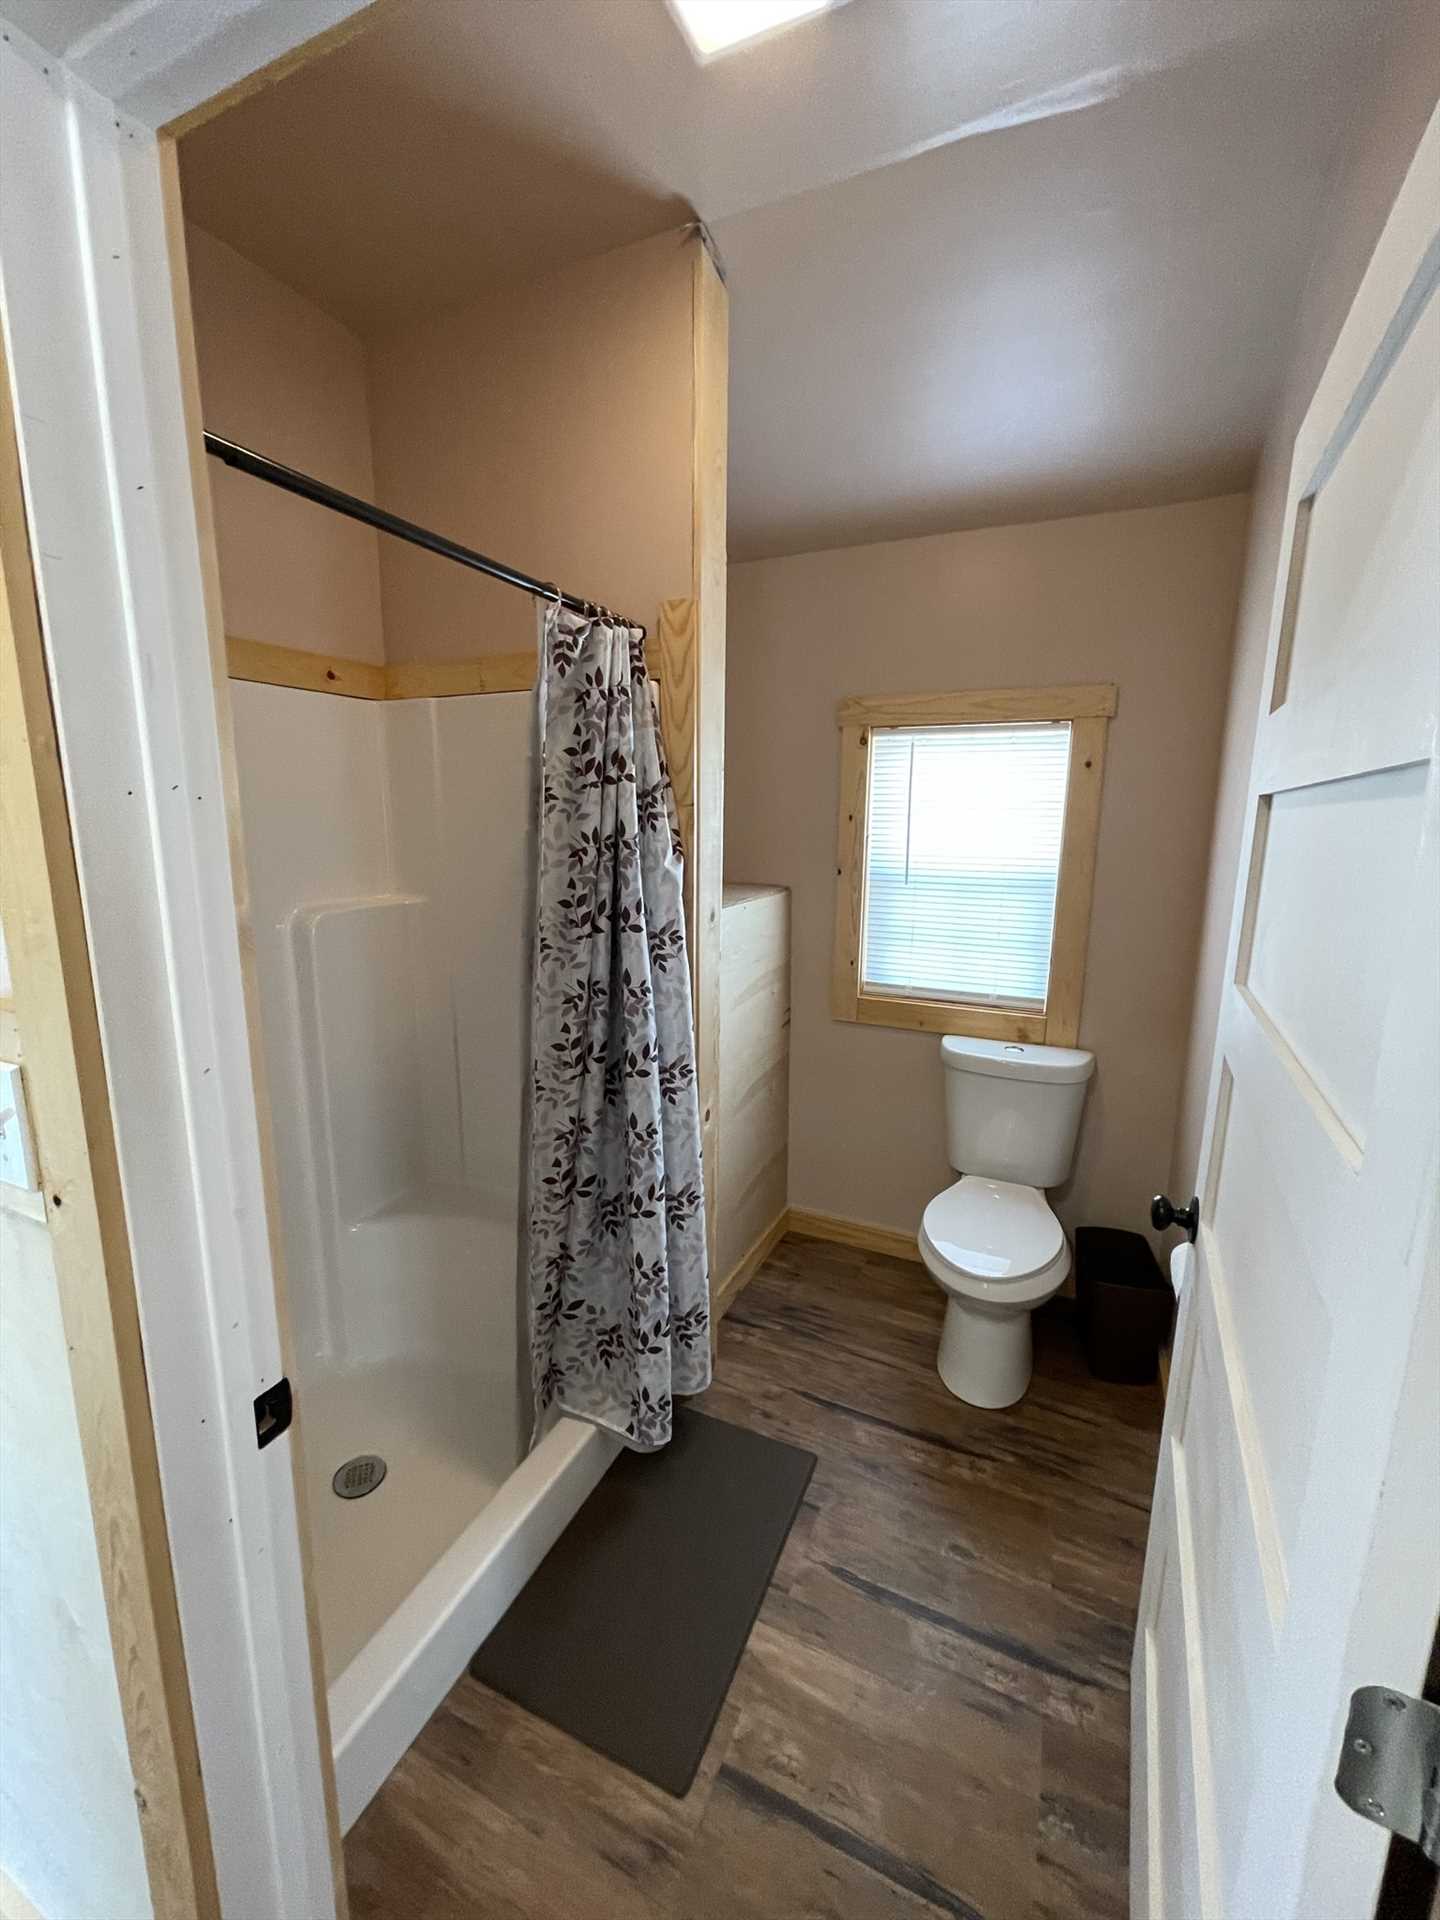                                                 You'll find a roomy shower stall and fresh bath linens in the cabin's sparkling-clean bathroom.